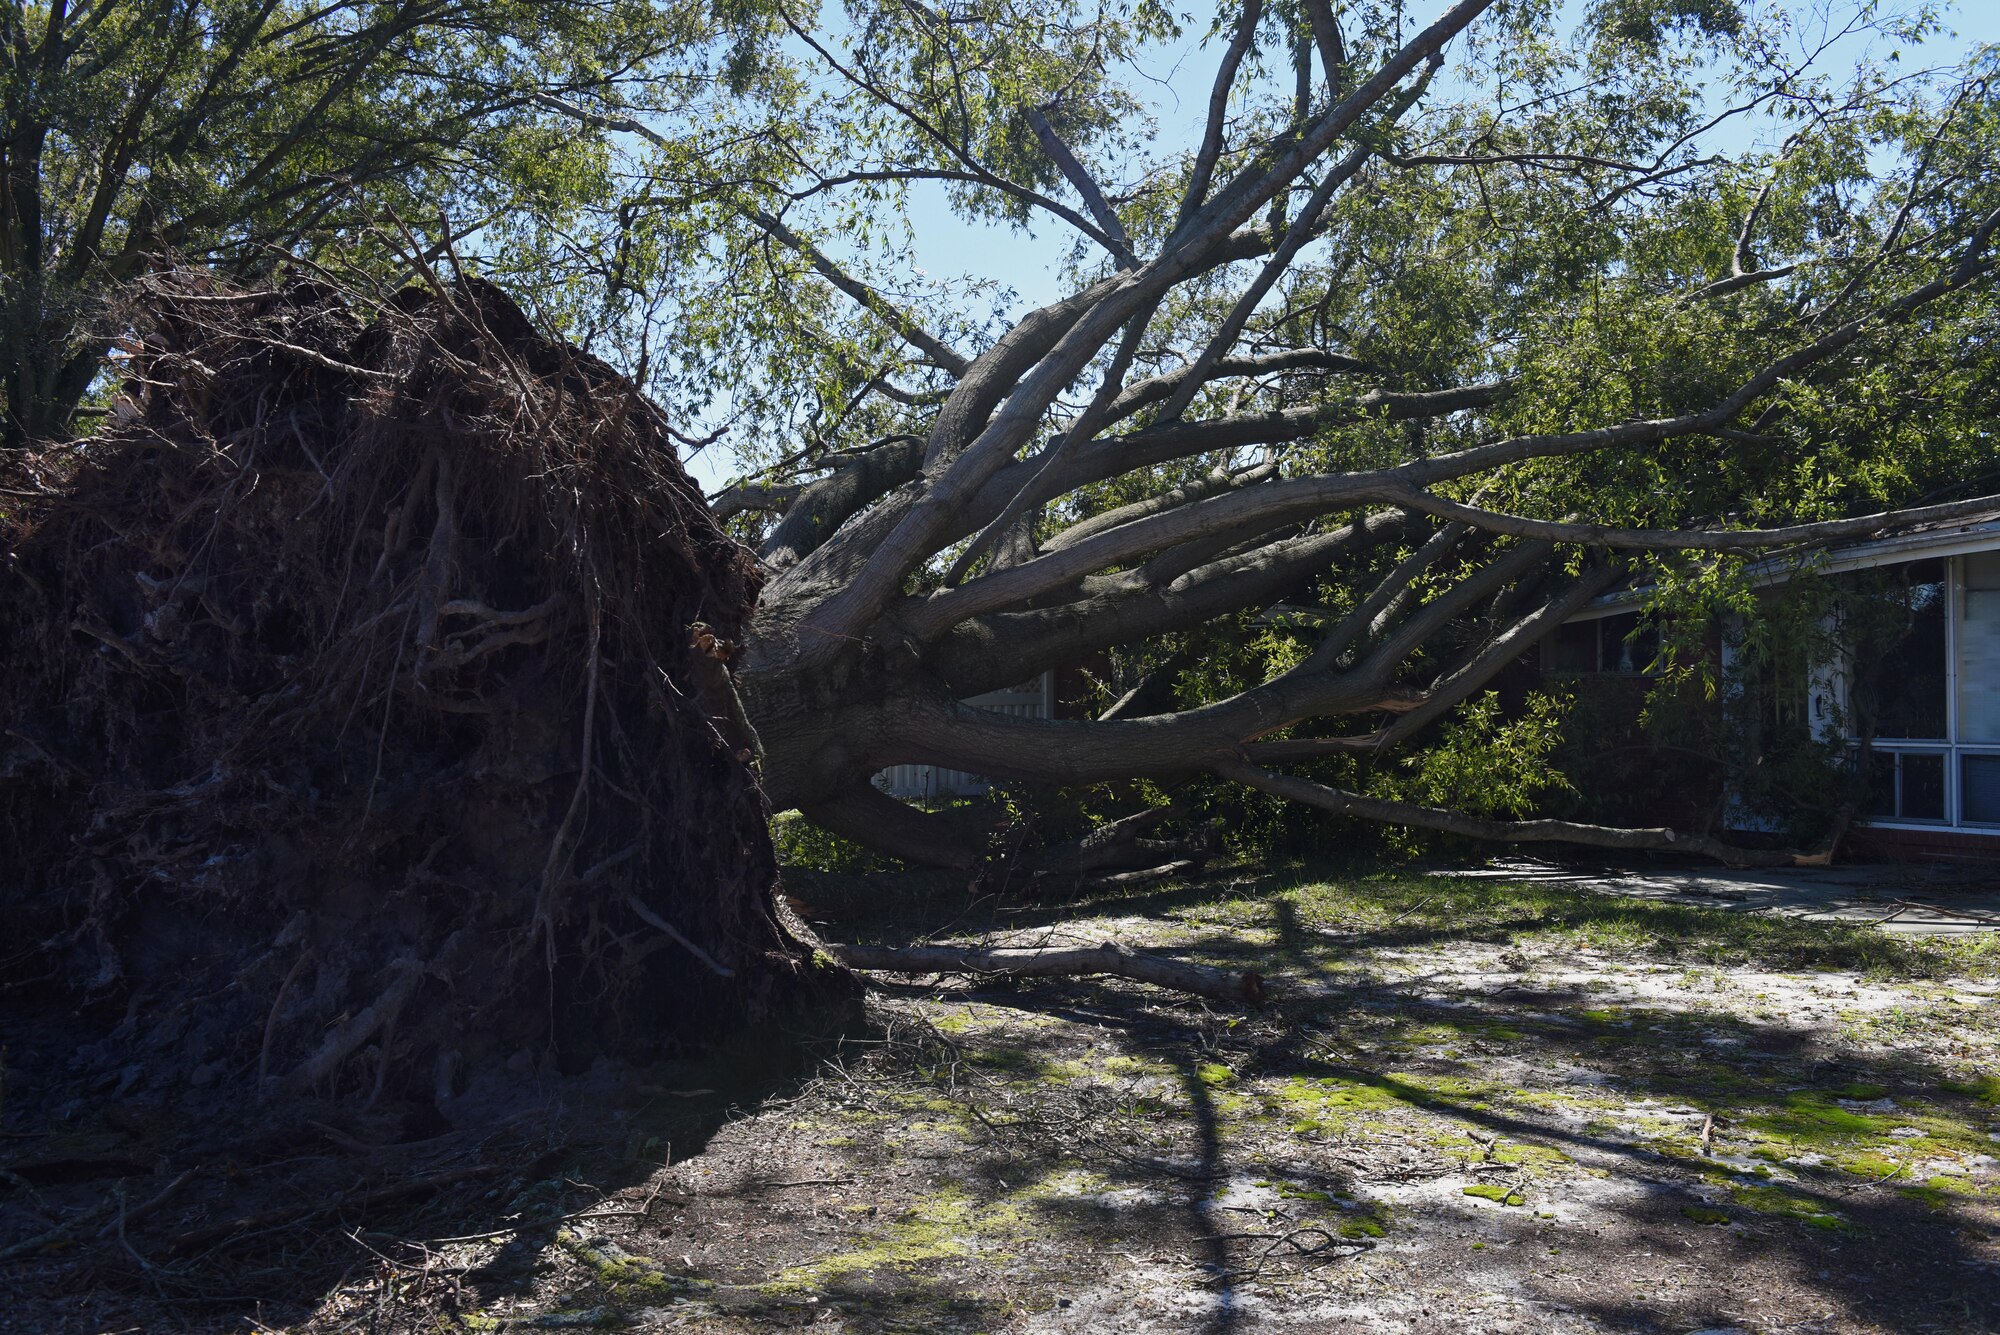 An uprooted tree damaged a building in base housing during Hurricane Matthew, Oct. 9, 2016, at Seymour Johnson Air Force Base, North Carolina. Team Seymour members were able to evacuate their homes to shelters located at Heritage Hall, the base gym and the Kitty Hawk Lounge during Matthew. (U.S. Air Force photo by Airman 1st Class Ashley Williamson)